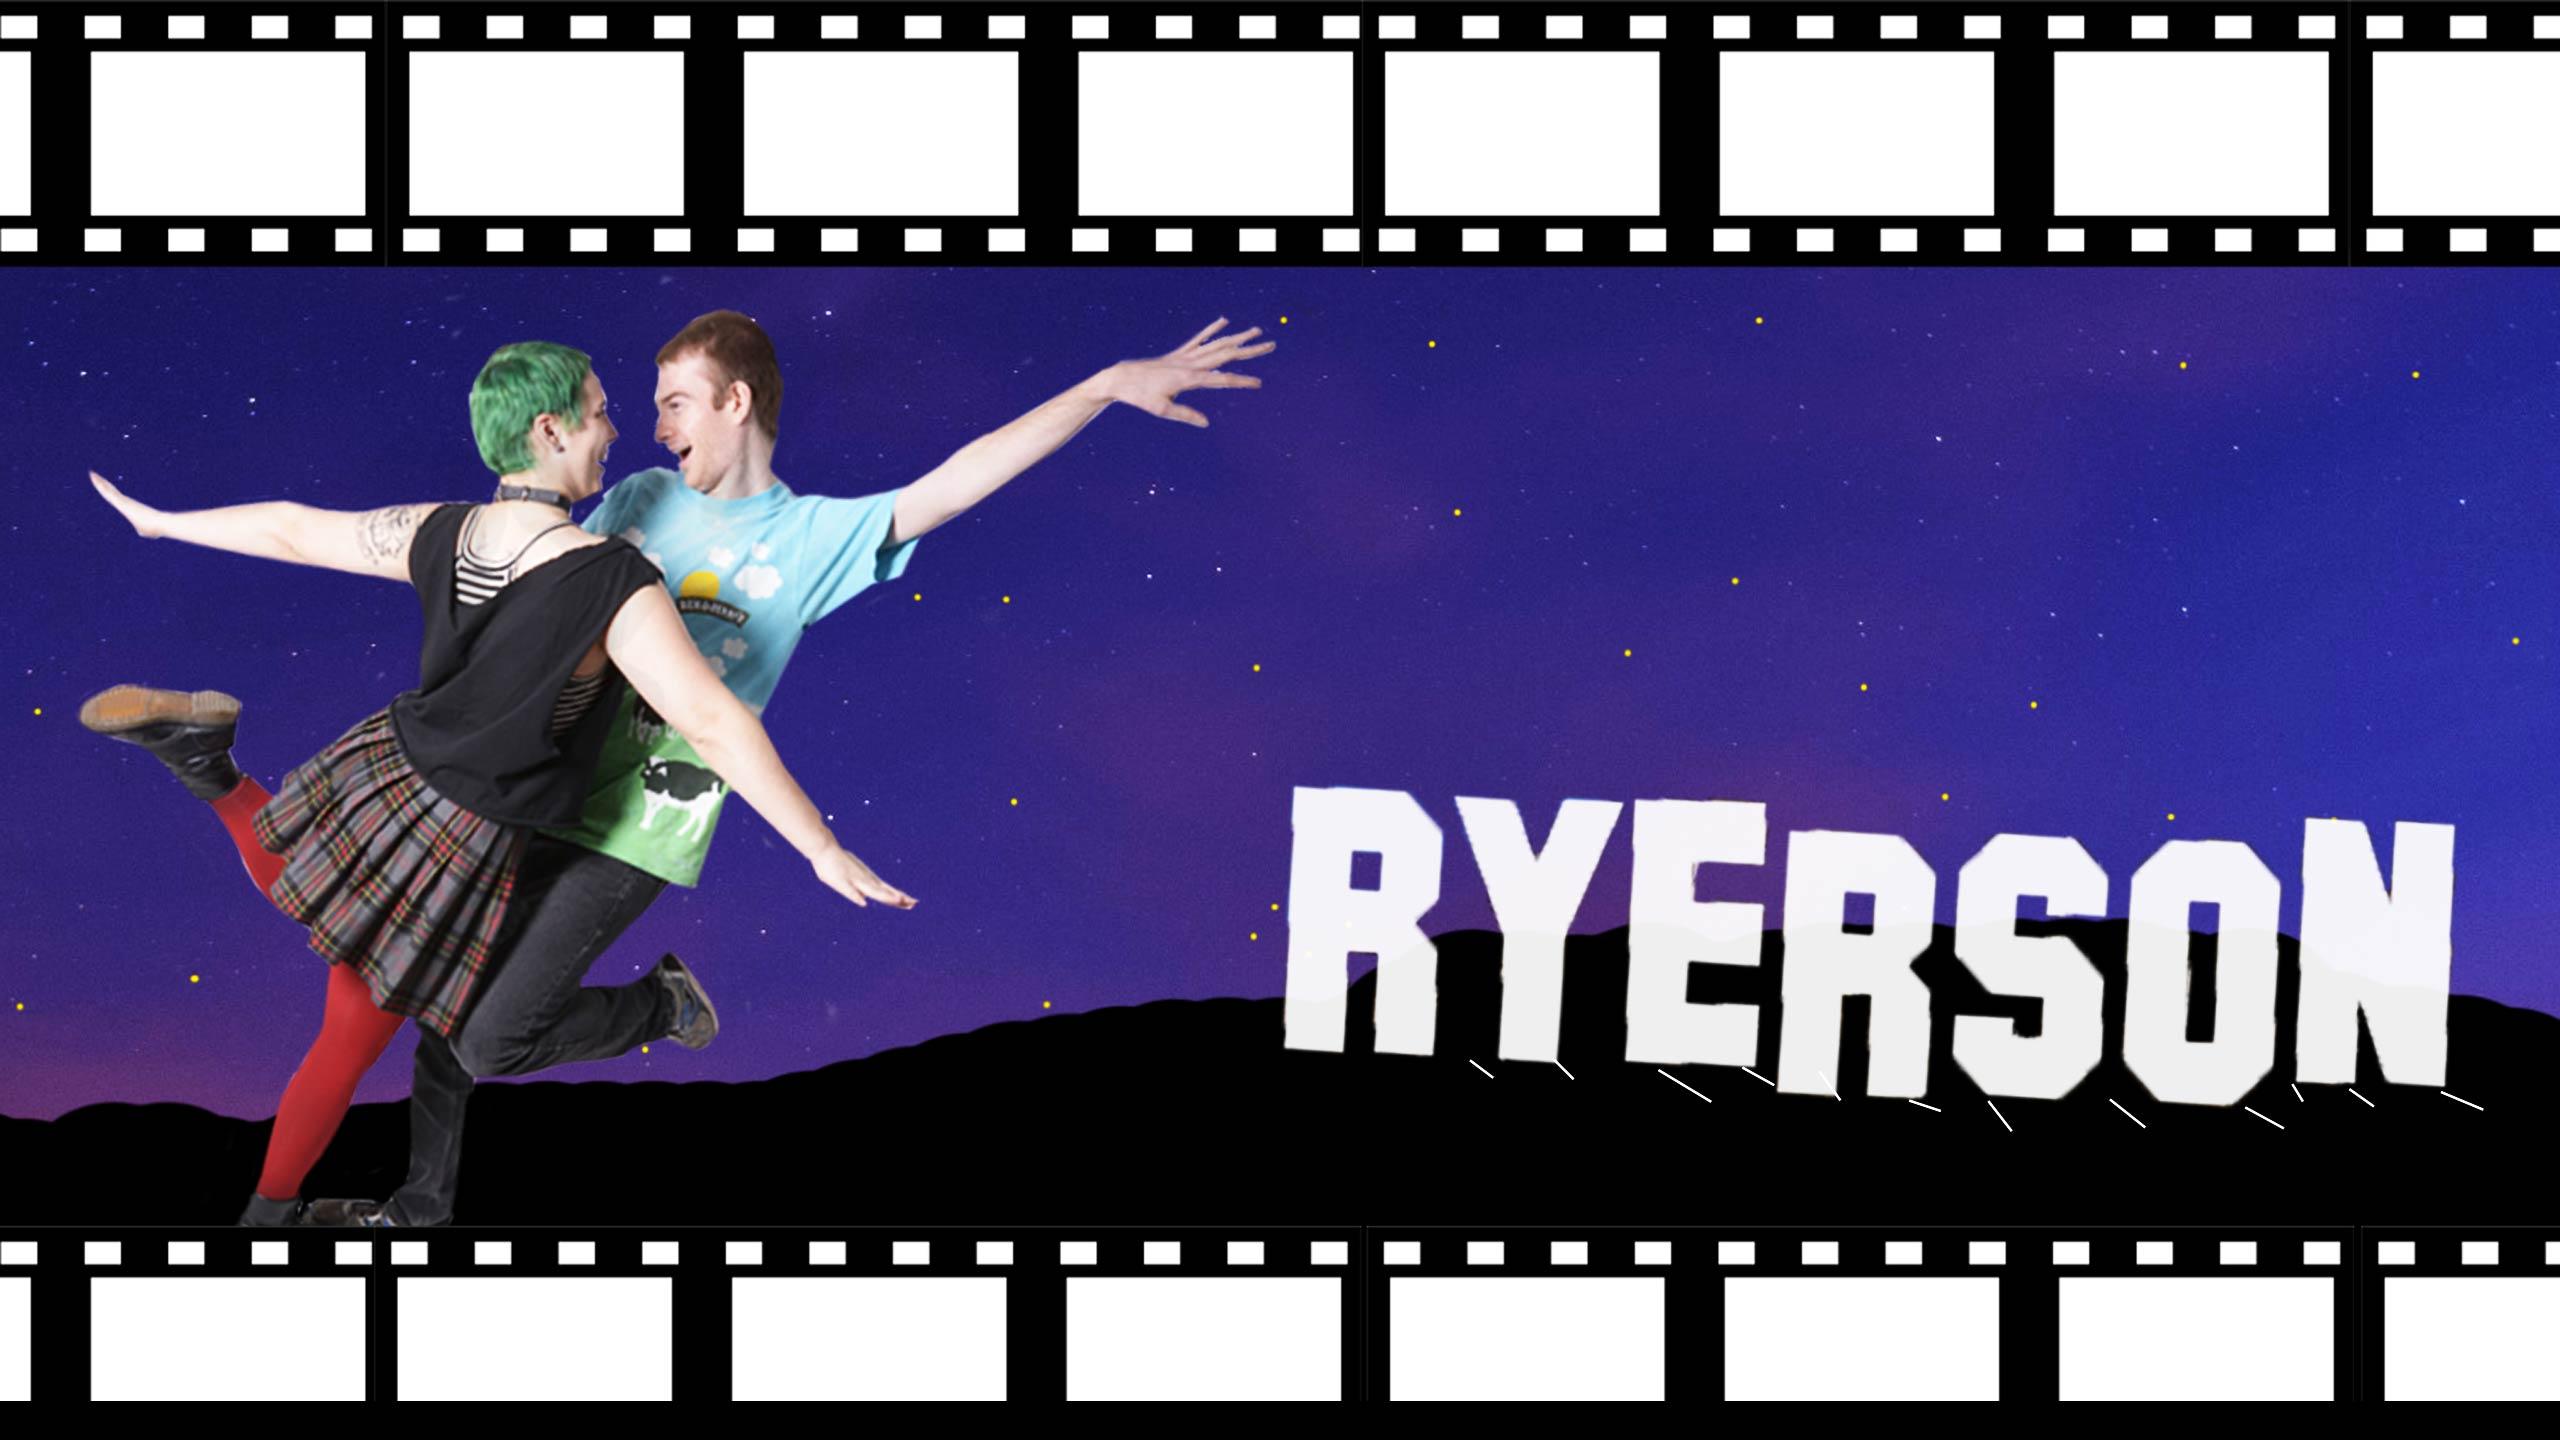 The Hollywood sign has been replaced with the word Ryerson. Two people dance next to it.